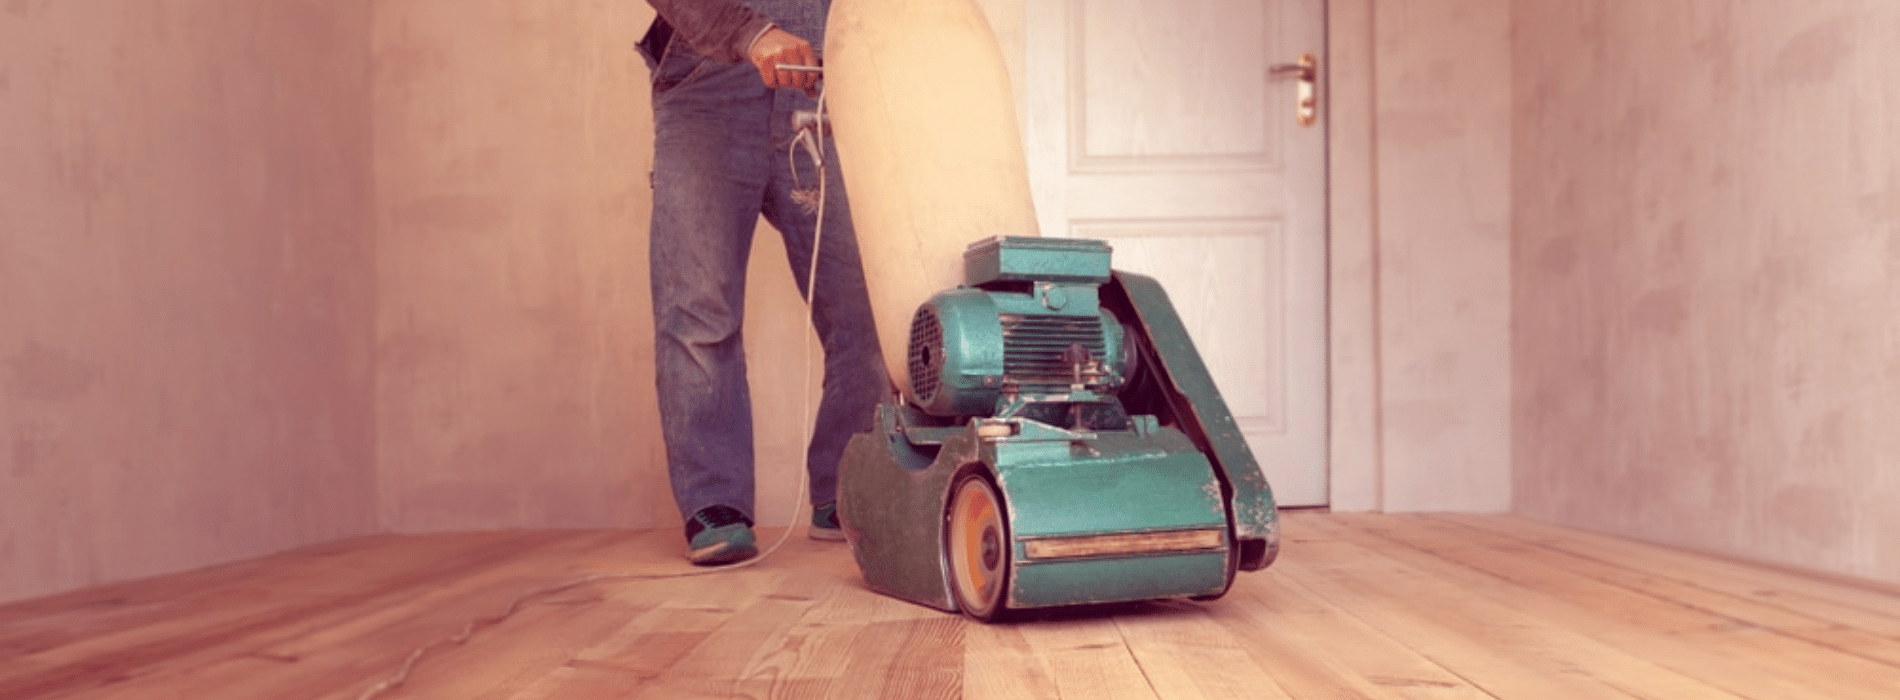 Mr Sander® in Kentish Town, NW5, using a 2200 effect, 230 voltage, 50 frequency, and 200x750 mm Bona belt sander for meticulous herringbone floor restoration. Equipped with a HEPA filter dust extraction system for clean, dust-free results.